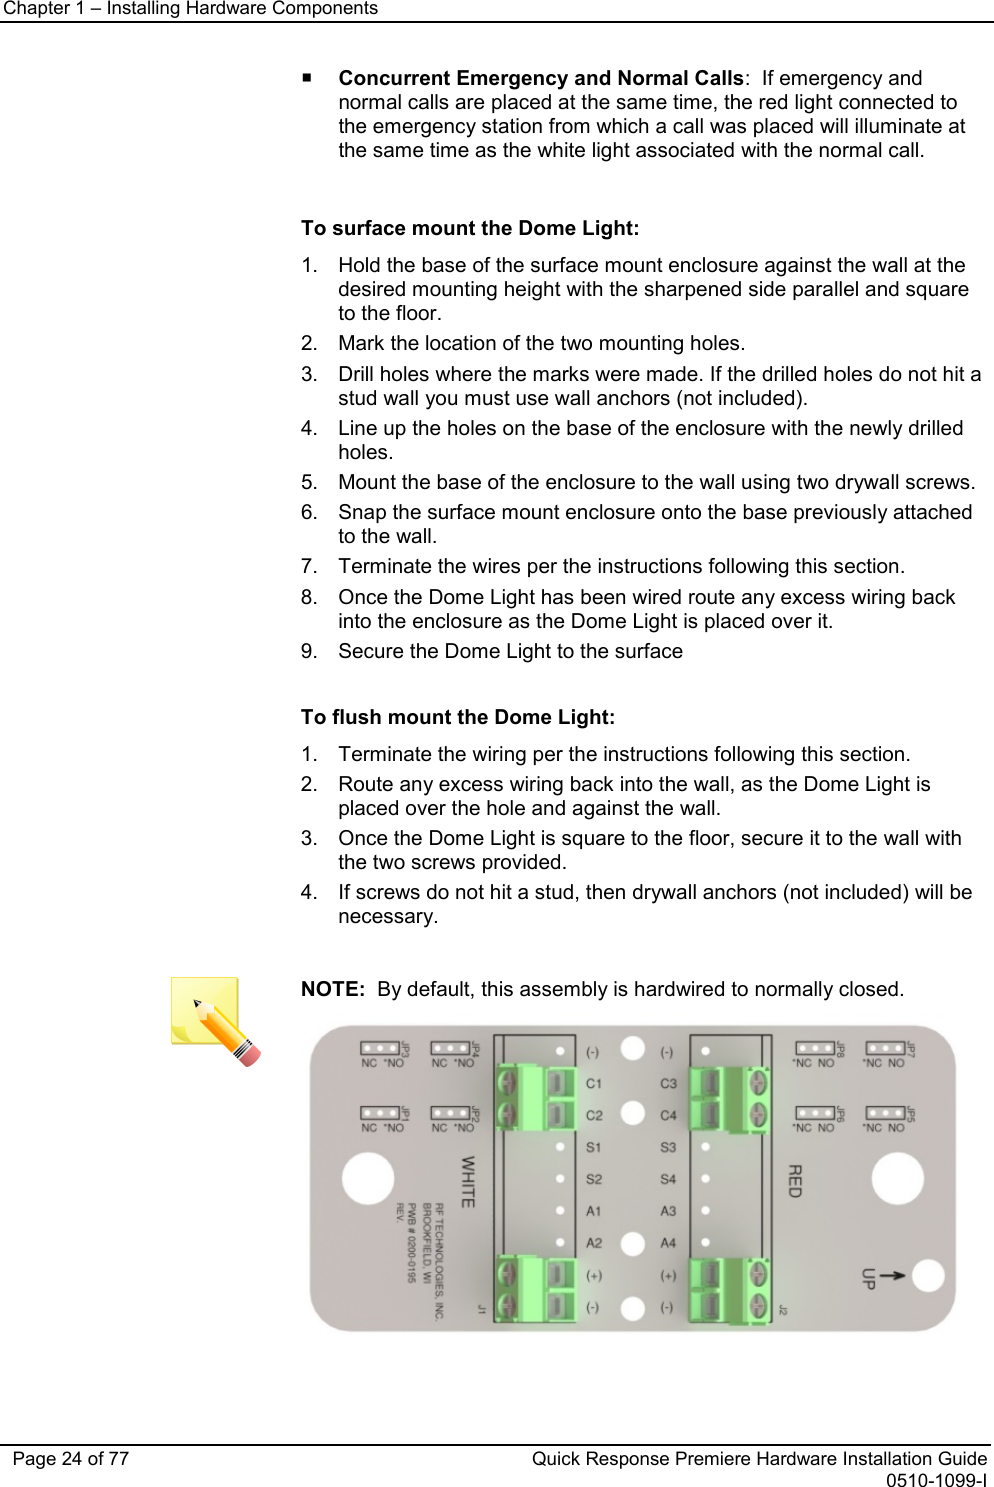 Chapter 1 – Installing Hardware Components   Page 24 of 77 Quick Response Premiere Hardware Installation Guide 0510-1099-I  Concurrent Emergency and Normal Calls:  If emergency and normal calls are placed at the same time, the red light connected to the emergency station from which a call was placed will illuminate at the same time as the white light associated with the normal call.   To surface mount the Dome Light: 1. Hold the base of the surface mount enclosure against the wall at the desired mounting height with the sharpened side parallel and square to the floor.  2. Mark the location of the two mounting holes. 3. Drill holes where the marks were made. If the drilled holes do not hit a stud wall you must use wall anchors (not included). 4. Line up the holes on the base of the enclosure with the newly drilled holes.  5. Mount the base of the enclosure to the wall using two drywall screws. 6. Snap the surface mount enclosure onto the base previously attached to the wall.  7. Terminate the wires per the instructions following this section. 8. Once the Dome Light has been wired route any excess wiring back into the enclosure as the Dome Light is placed over it. 9. Secure the Dome Light to the surface  To flush mount the Dome Light: 1. Terminate the wiring per the instructions following this section. 2. Route any excess wiring back into the wall, as the Dome Light is placed over the hole and against the wall. 3. Once the Dome Light is square to the floor, secure it to the wall with the two screws provided. 4. If screws do not hit a stud, then drywall anchors (not included) will be necessary.   NOTE:  By default, this assembly is hardwired to normally closed.  